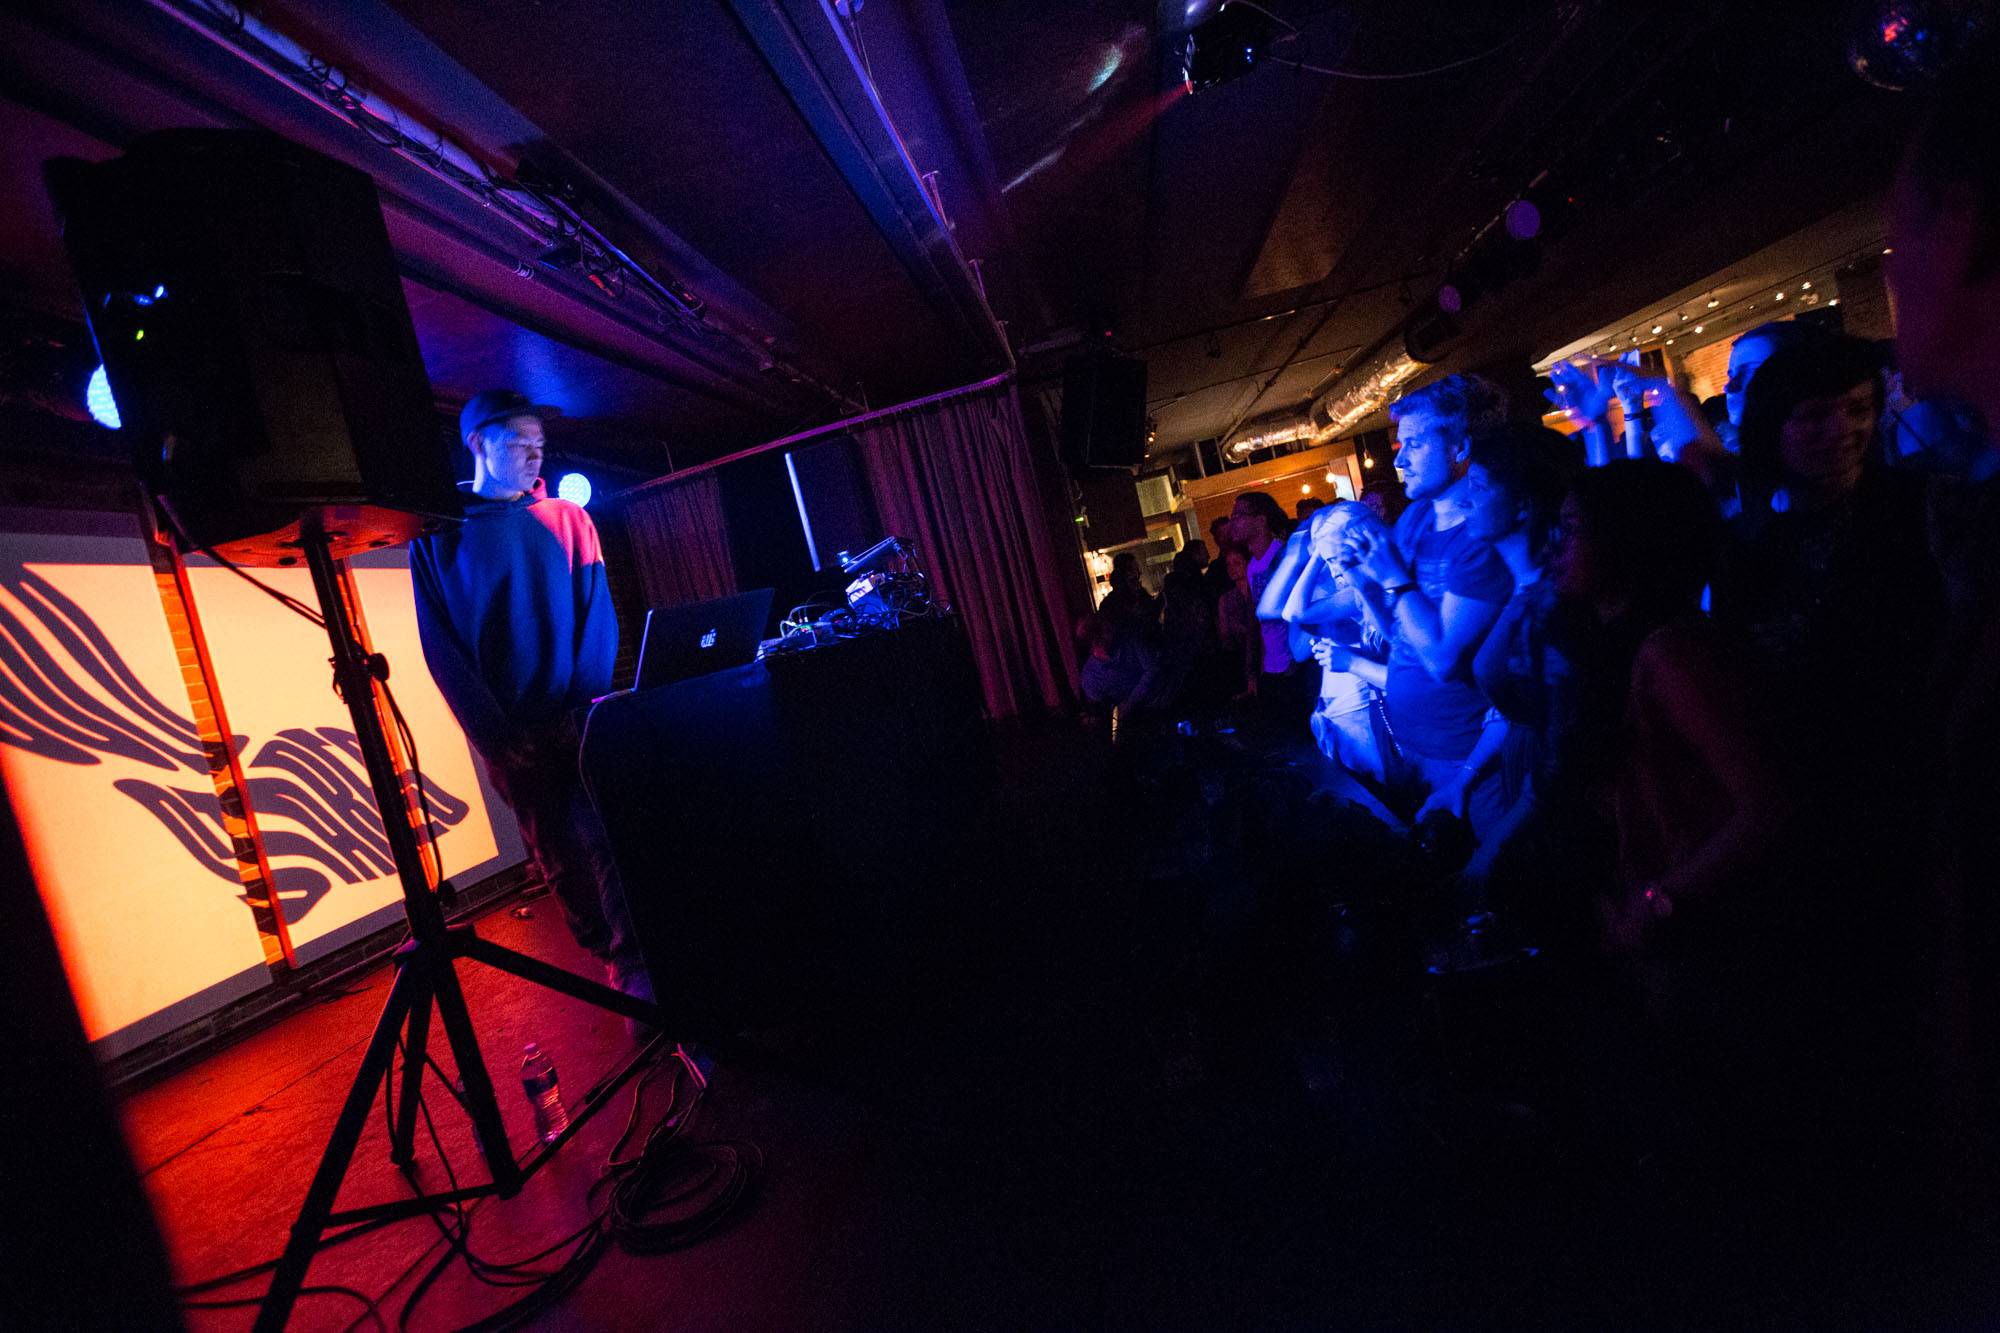 Nosaj Thing at the Electric Owl, Vancouver, Apr. 24 2015. Kirk Chantraine photo.